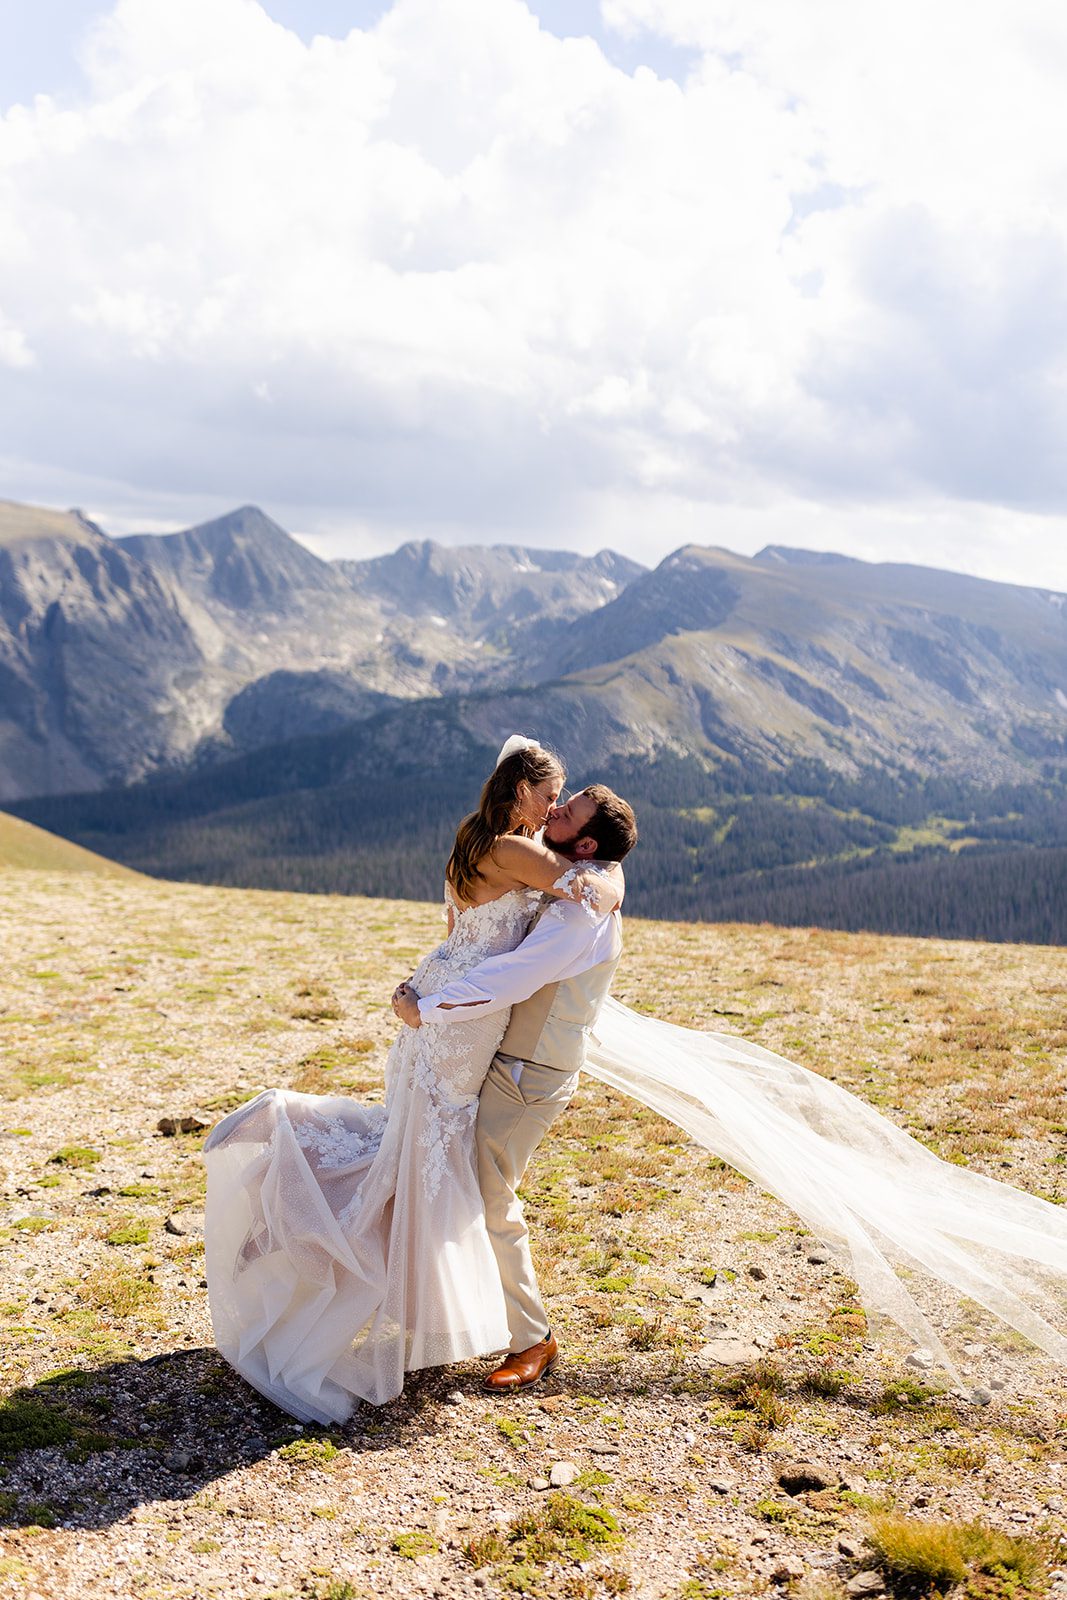 The groom holds his bride as they kiss on the mountain top. 